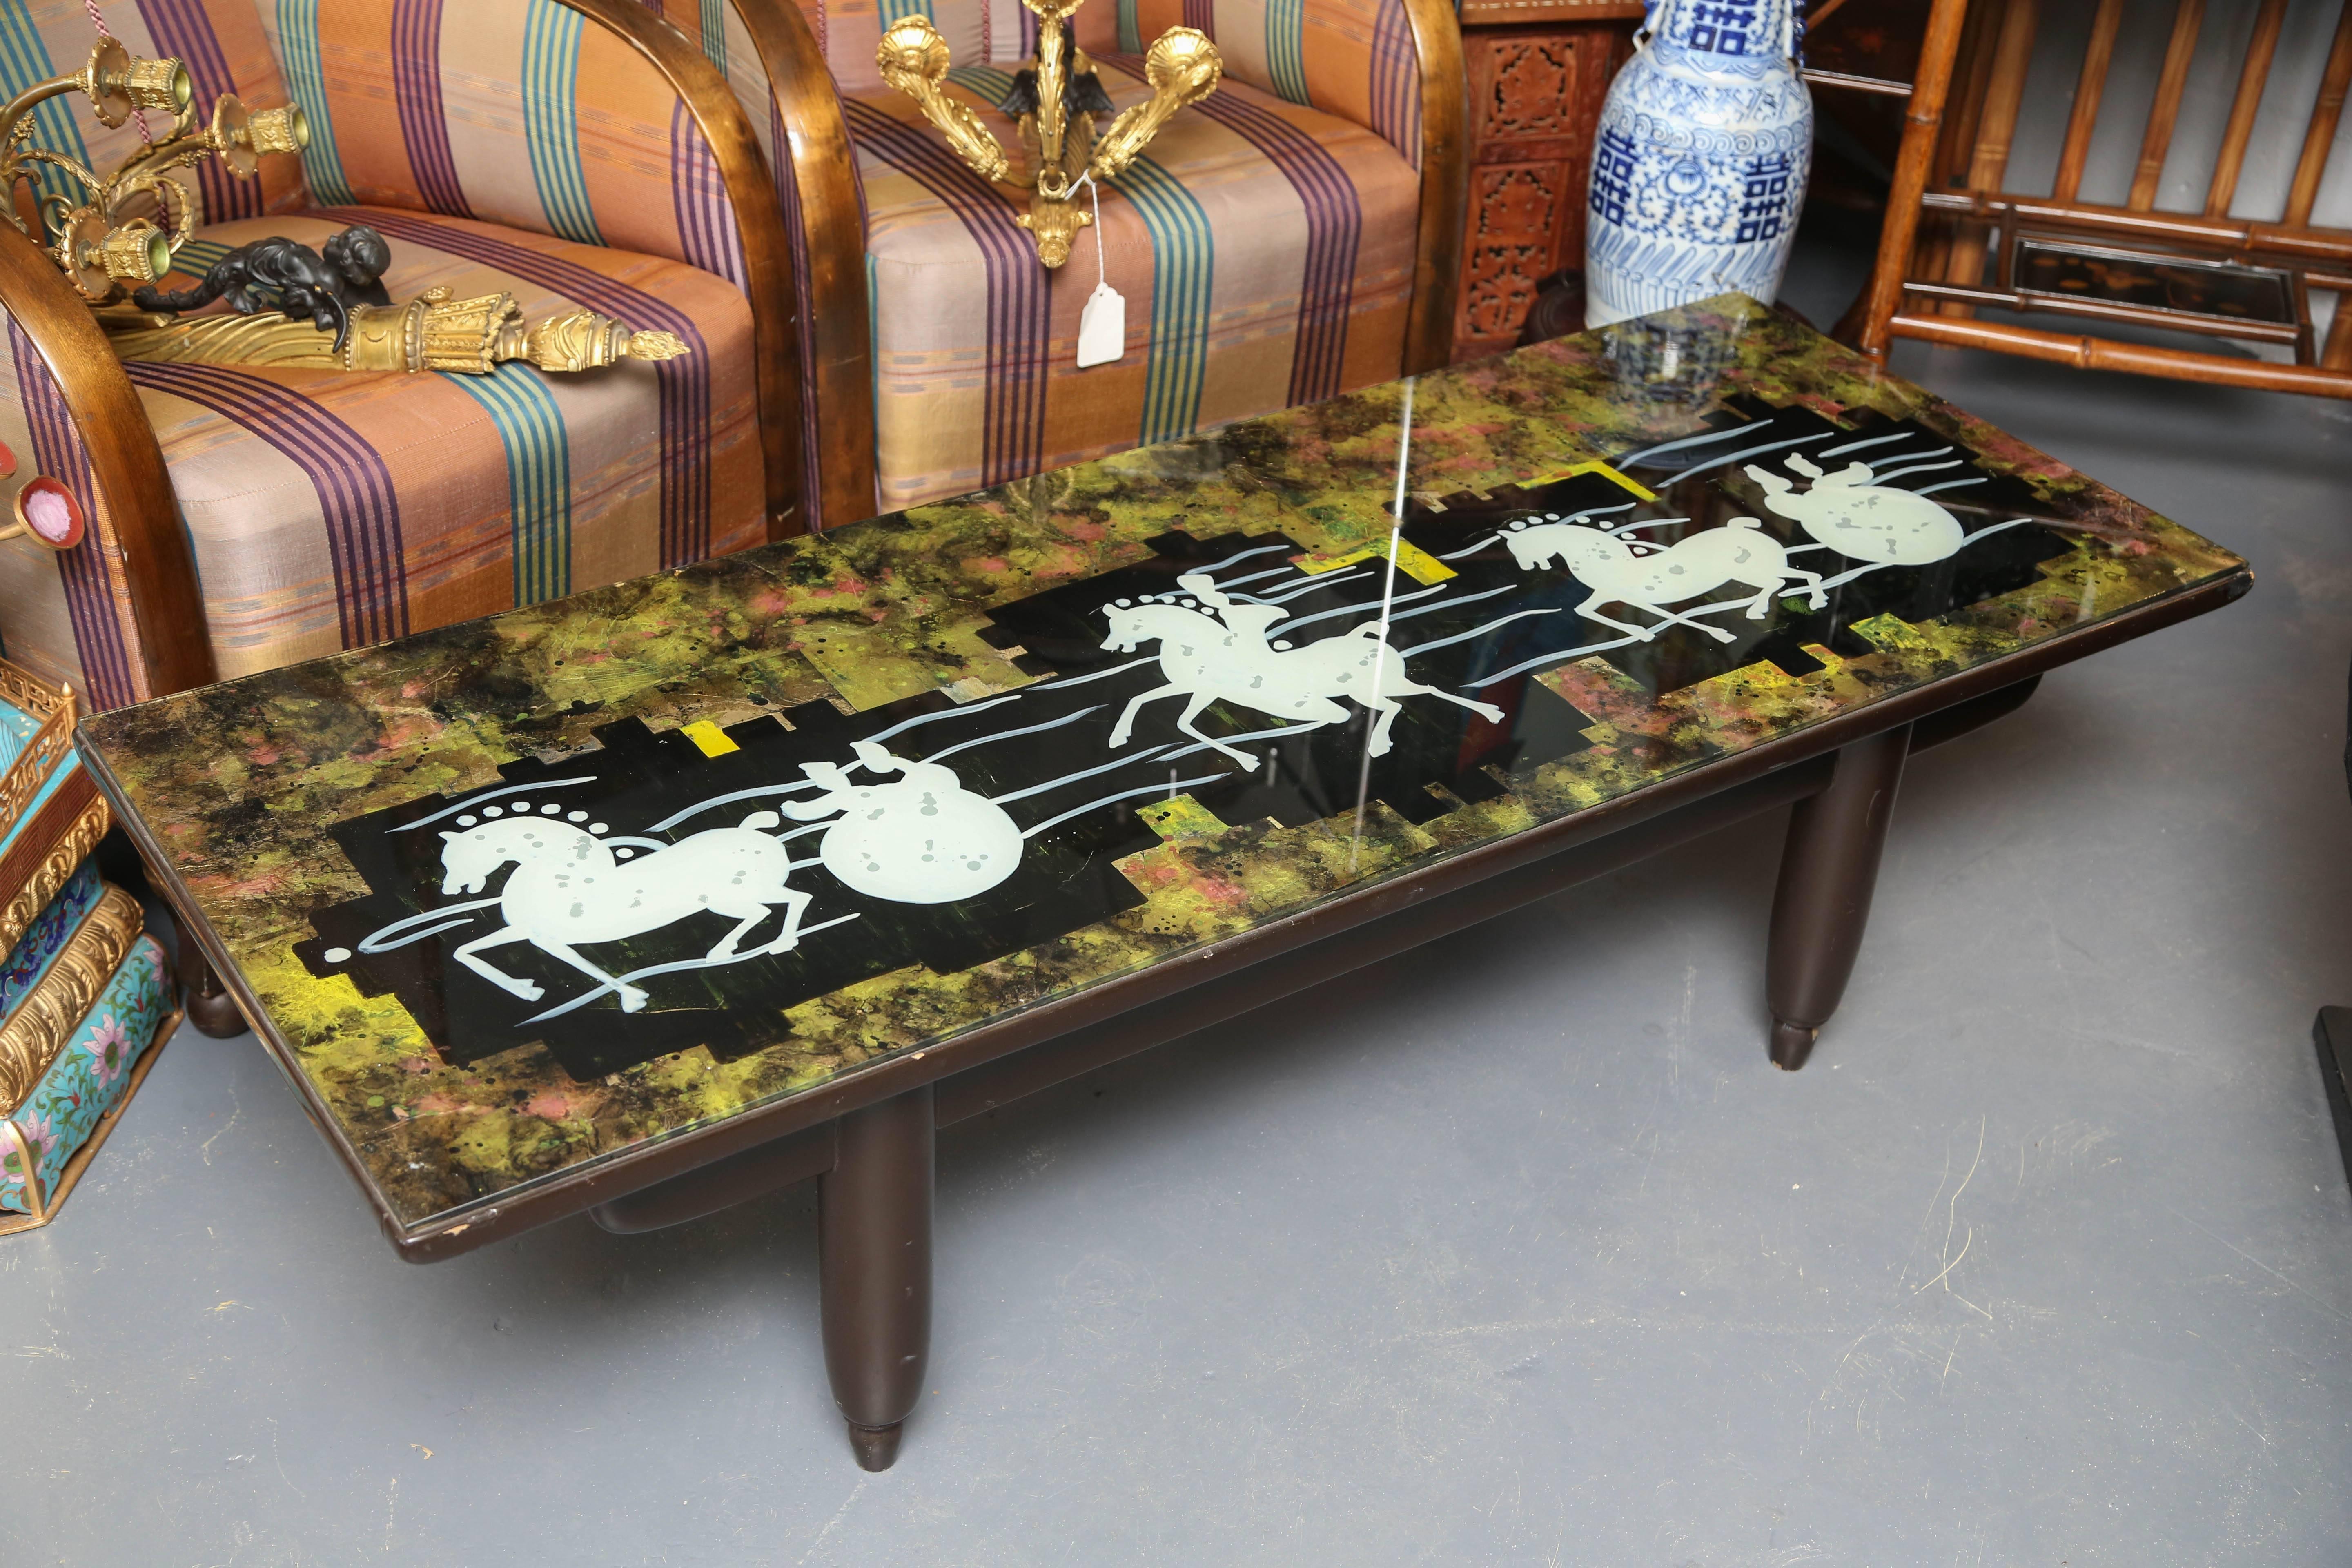 A visually stunning reverse painted equestrian theme with gold leaf backing.